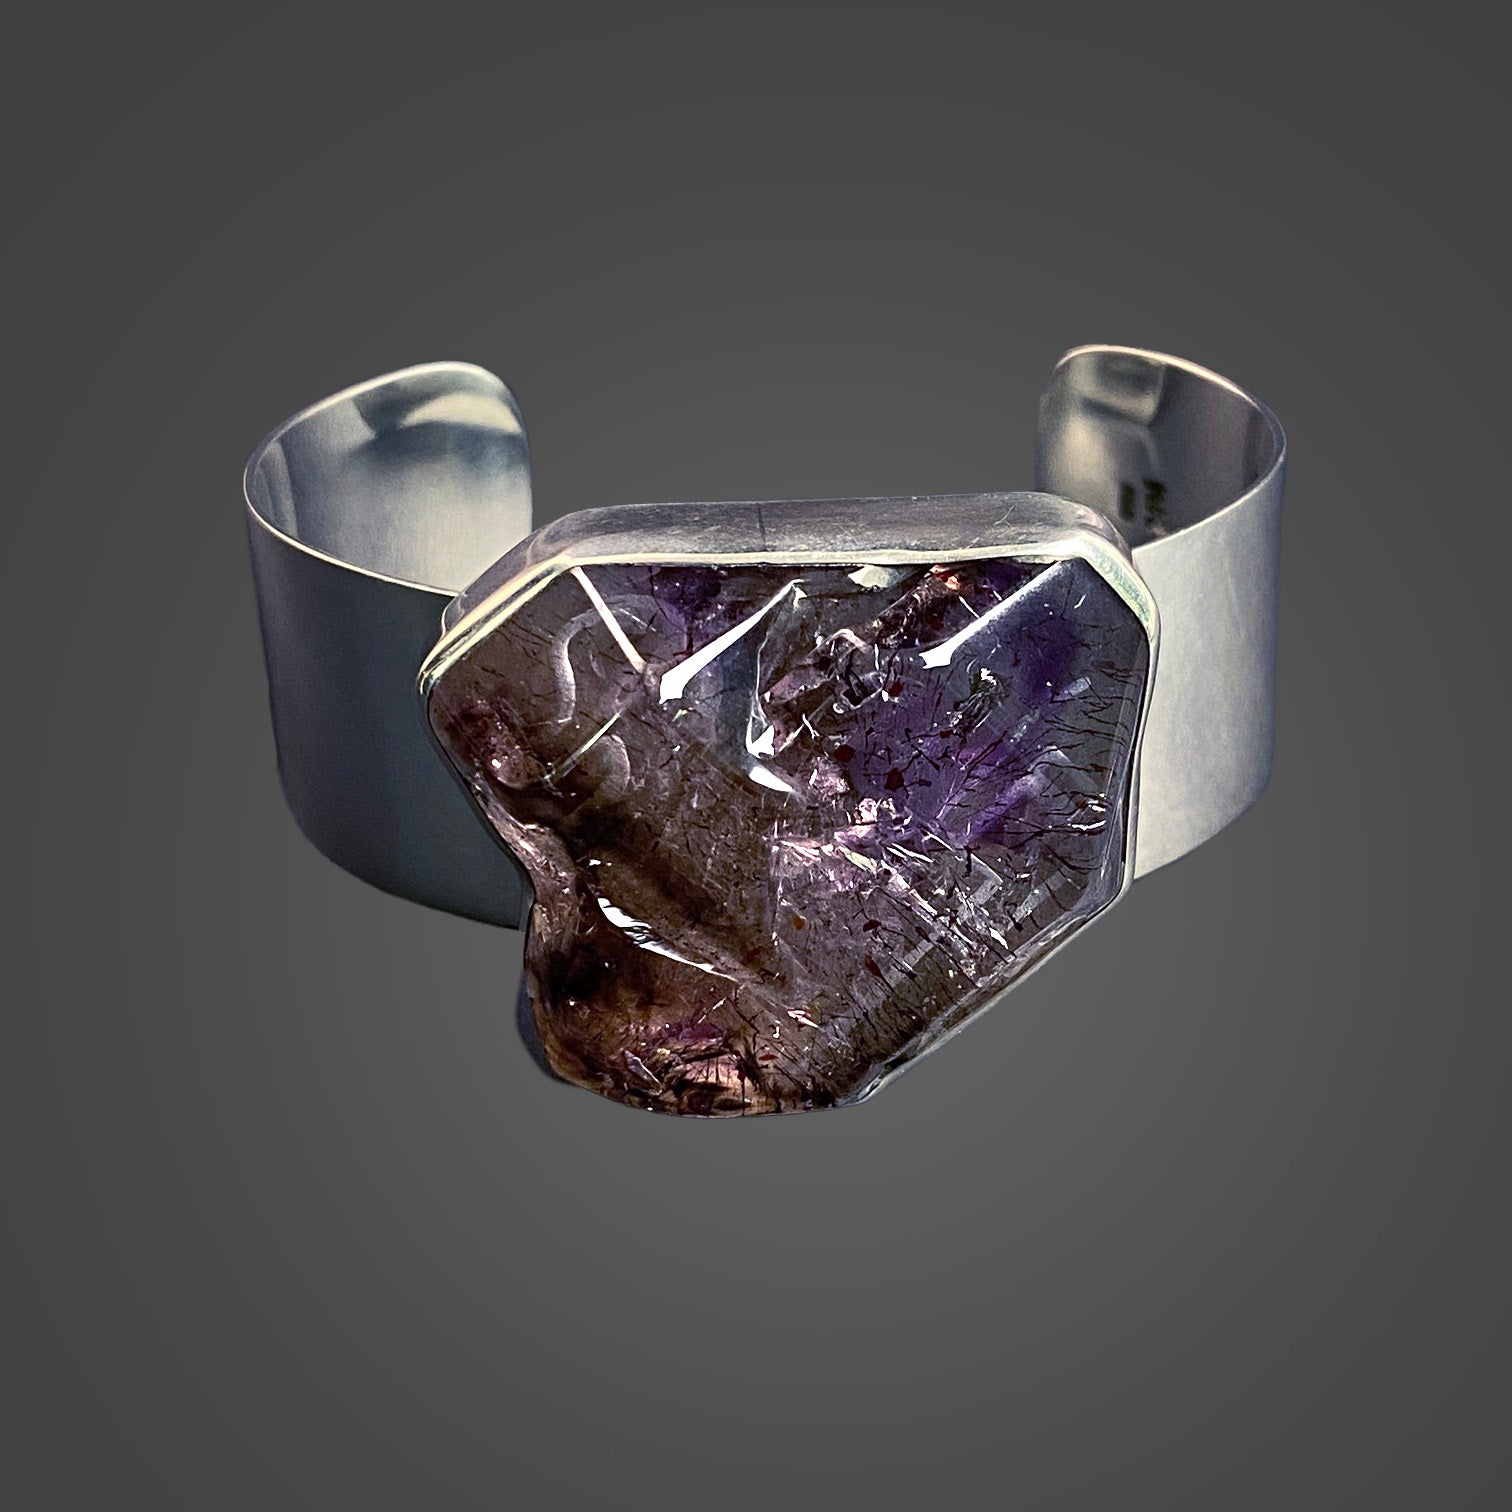 Shangaan Amethyst Sterling Silver Cuff Bracelet with Divine Feminine and Sacred Masculine Symbols